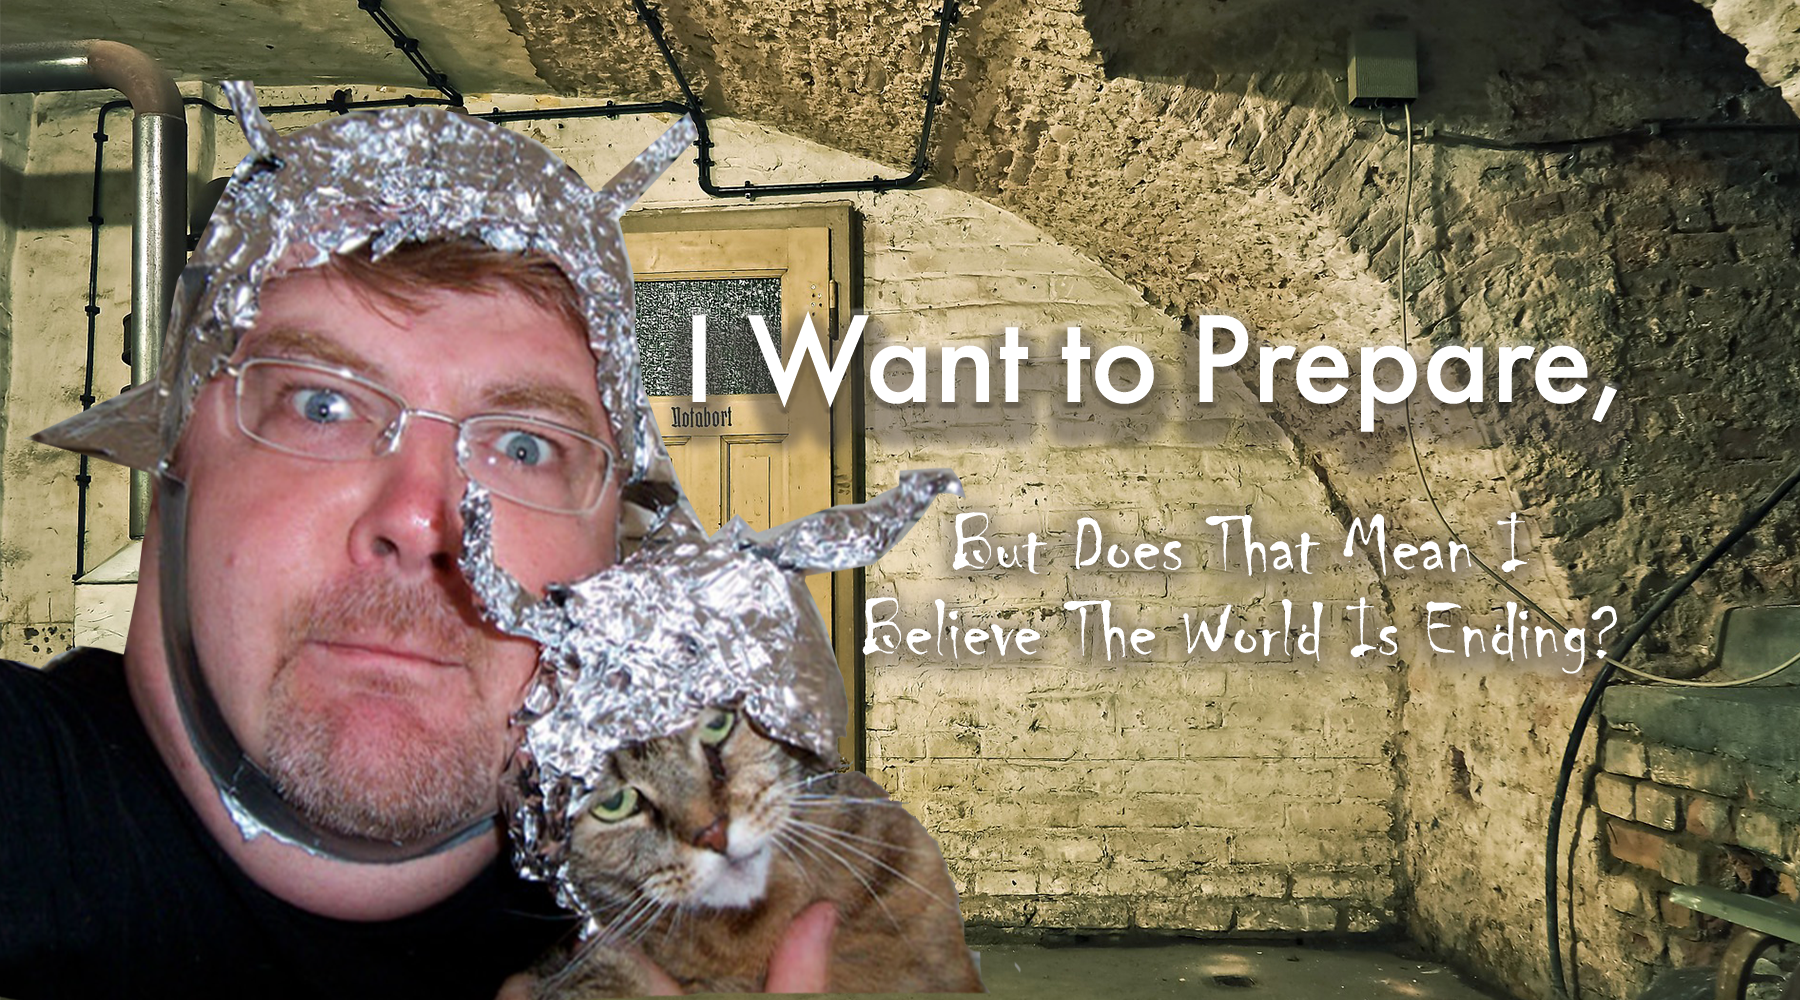 I Want to Prepare, But Does That Mean I Believe The World Is Ending?